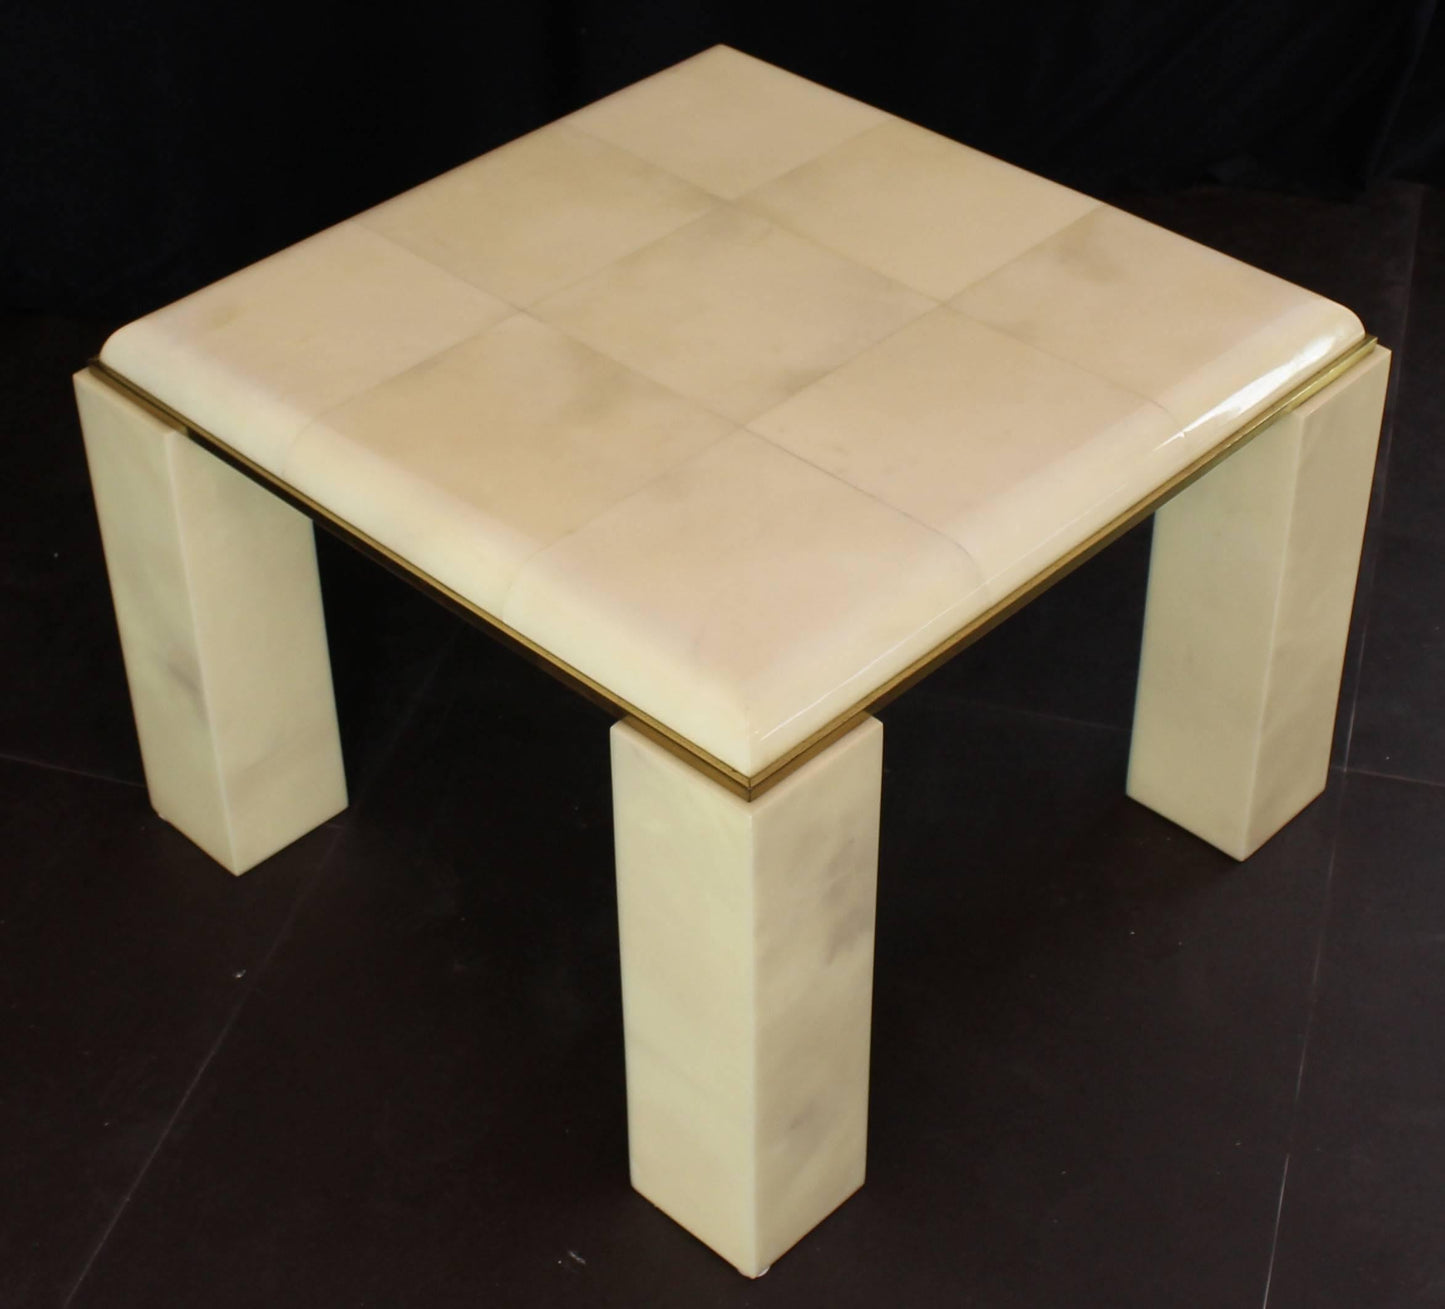 Lacquered Parchment Solid Brass Edge Trim Square Side Occasional Coffee Table